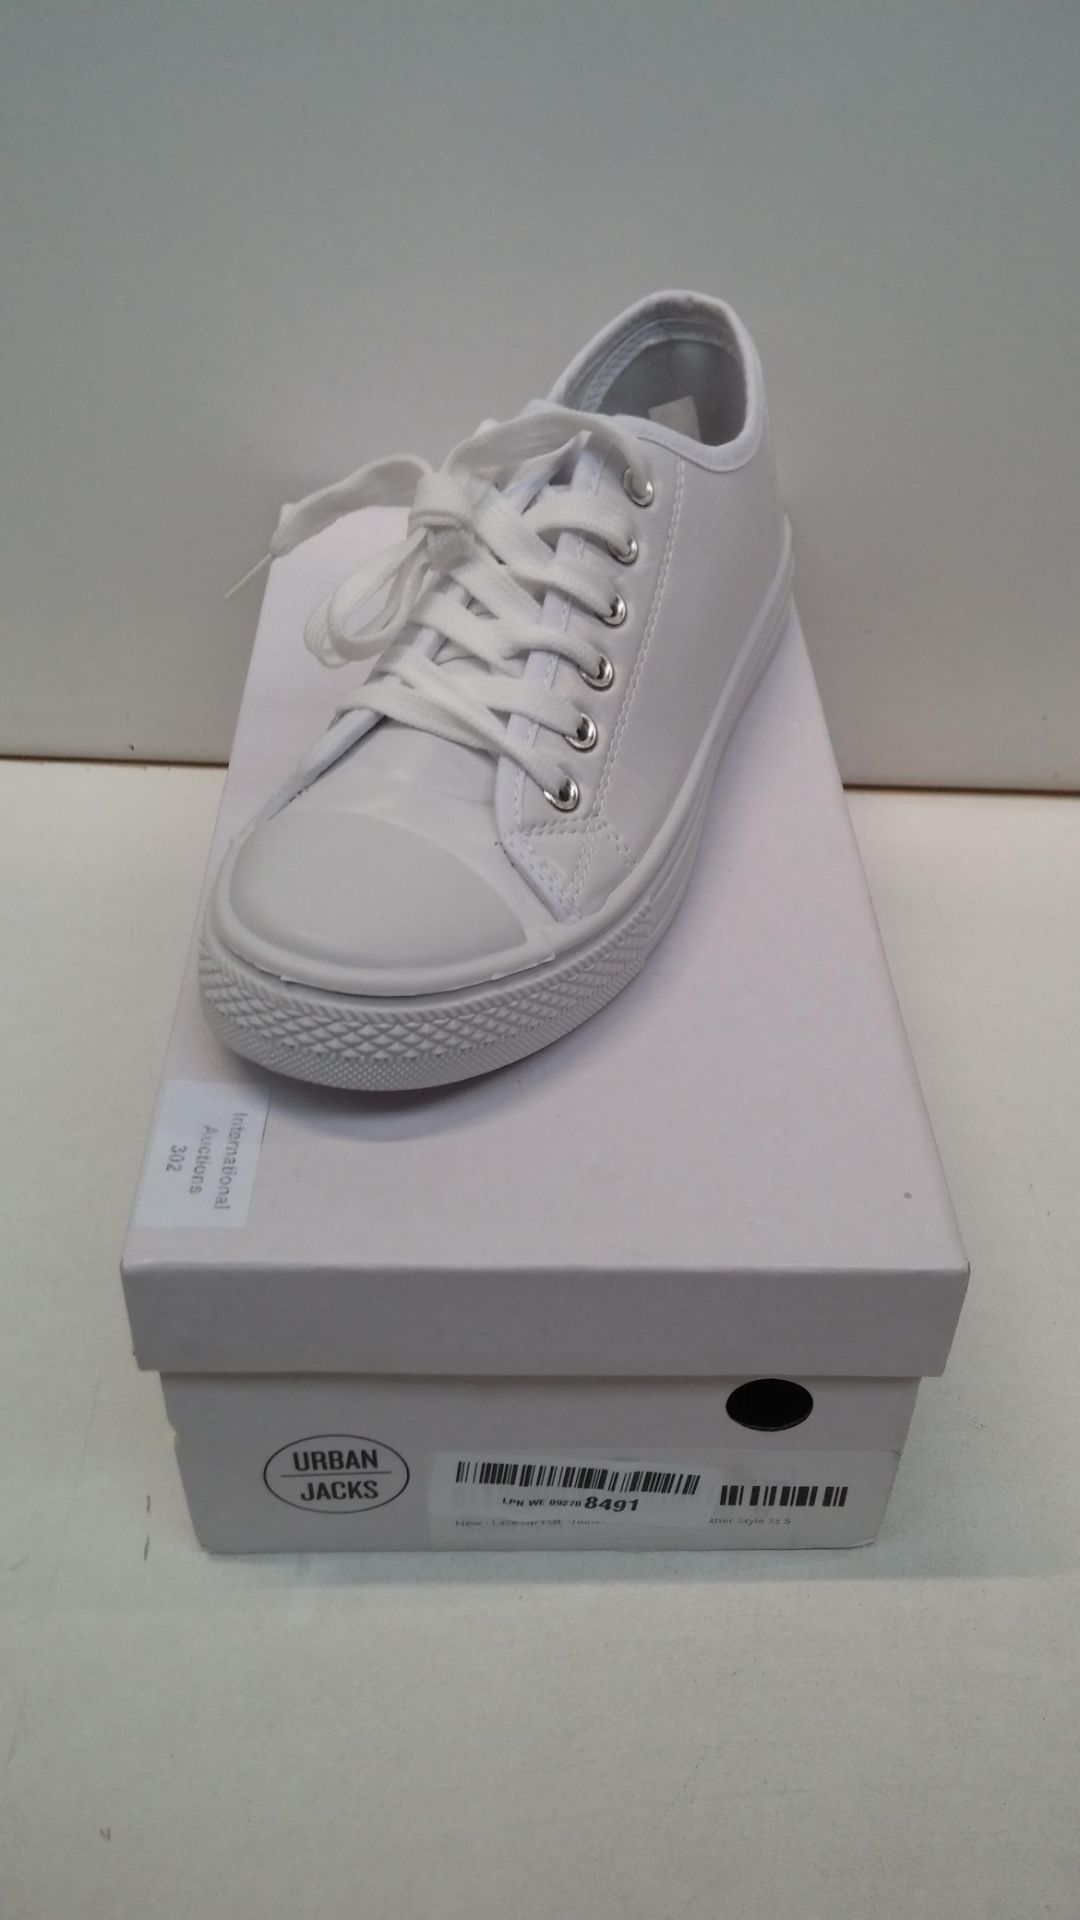 RRP £18.00 Lace Up Flat Trainers Shoes White Leather Style Sz 5 - Image 2 of 2